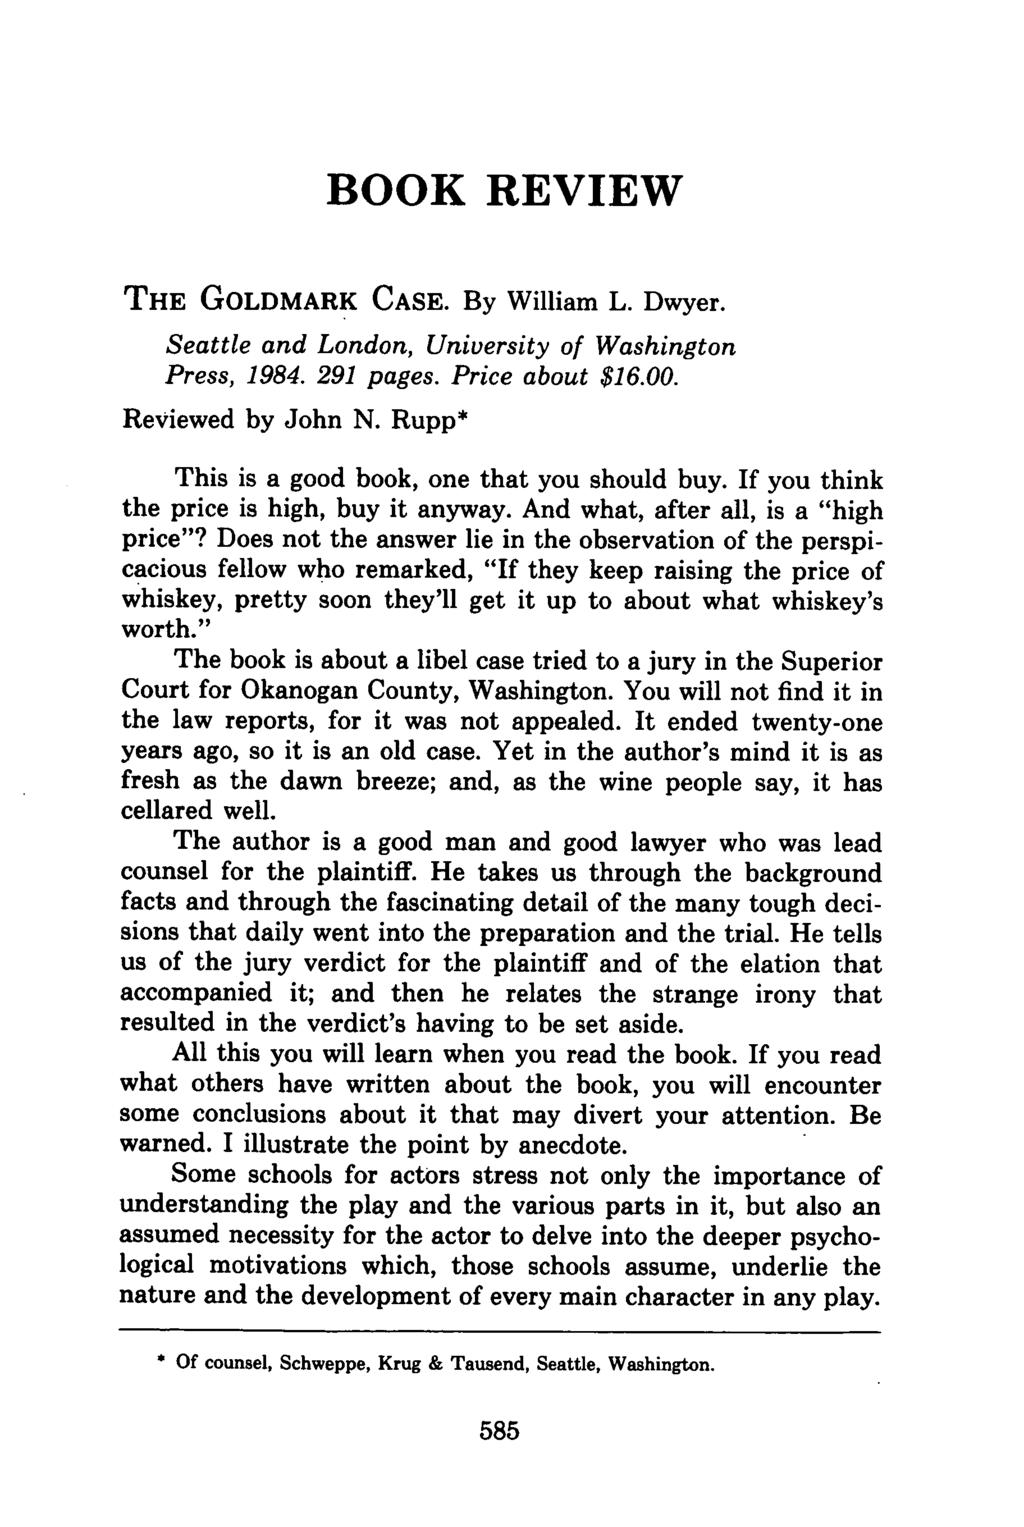 BOOK REVIEW THE GOLDMARK CASE. By William L. Dwyer. Seattle and London, University of Washington Press, 1984. 291 pages. Price about $16.00. Reviewed by John N.